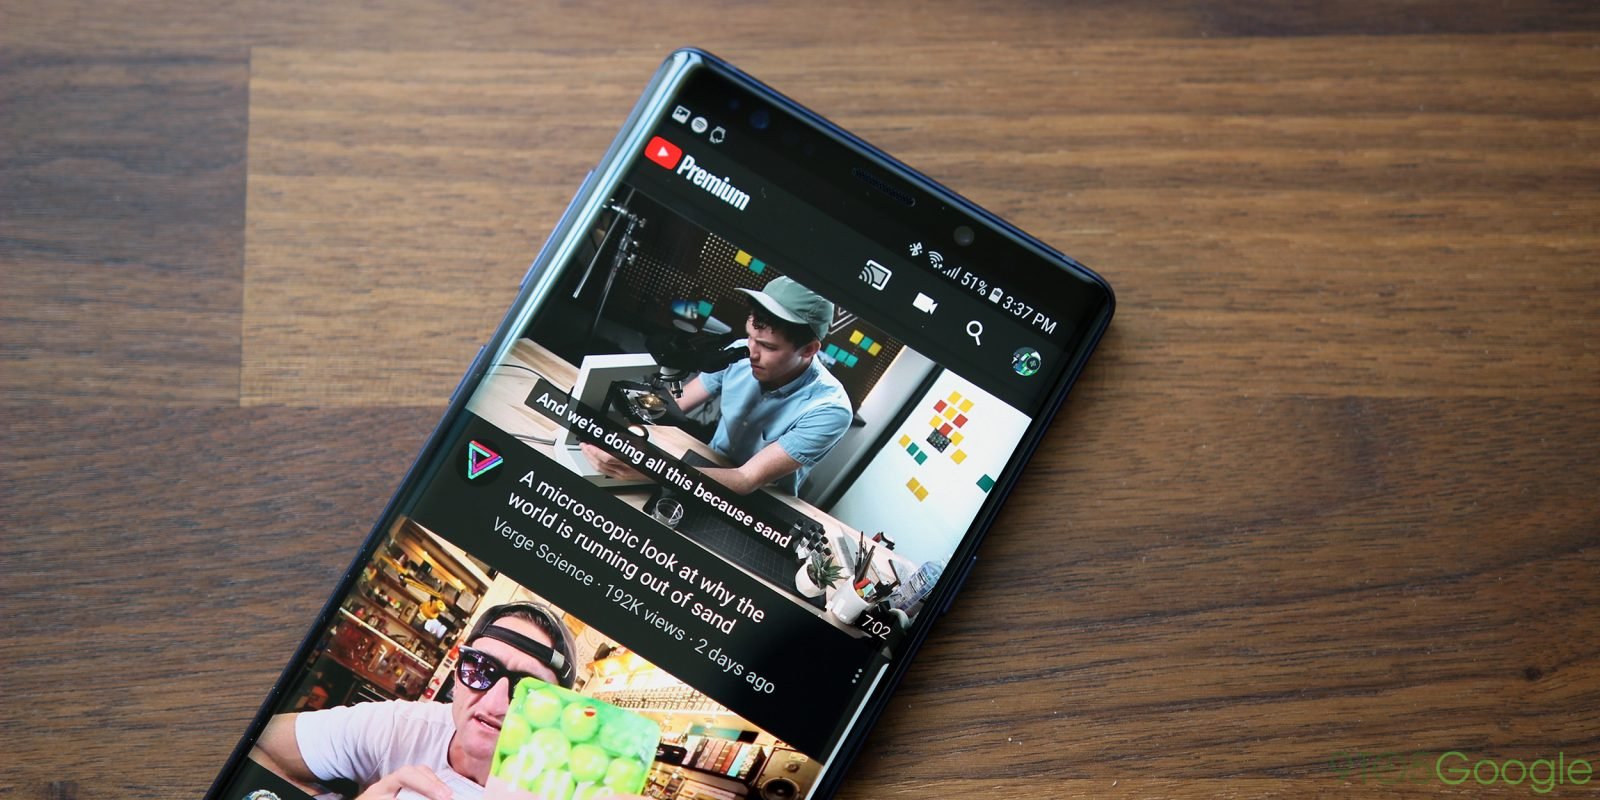 YouTube Stories: Use Story Feature to Maximize the Video Reach